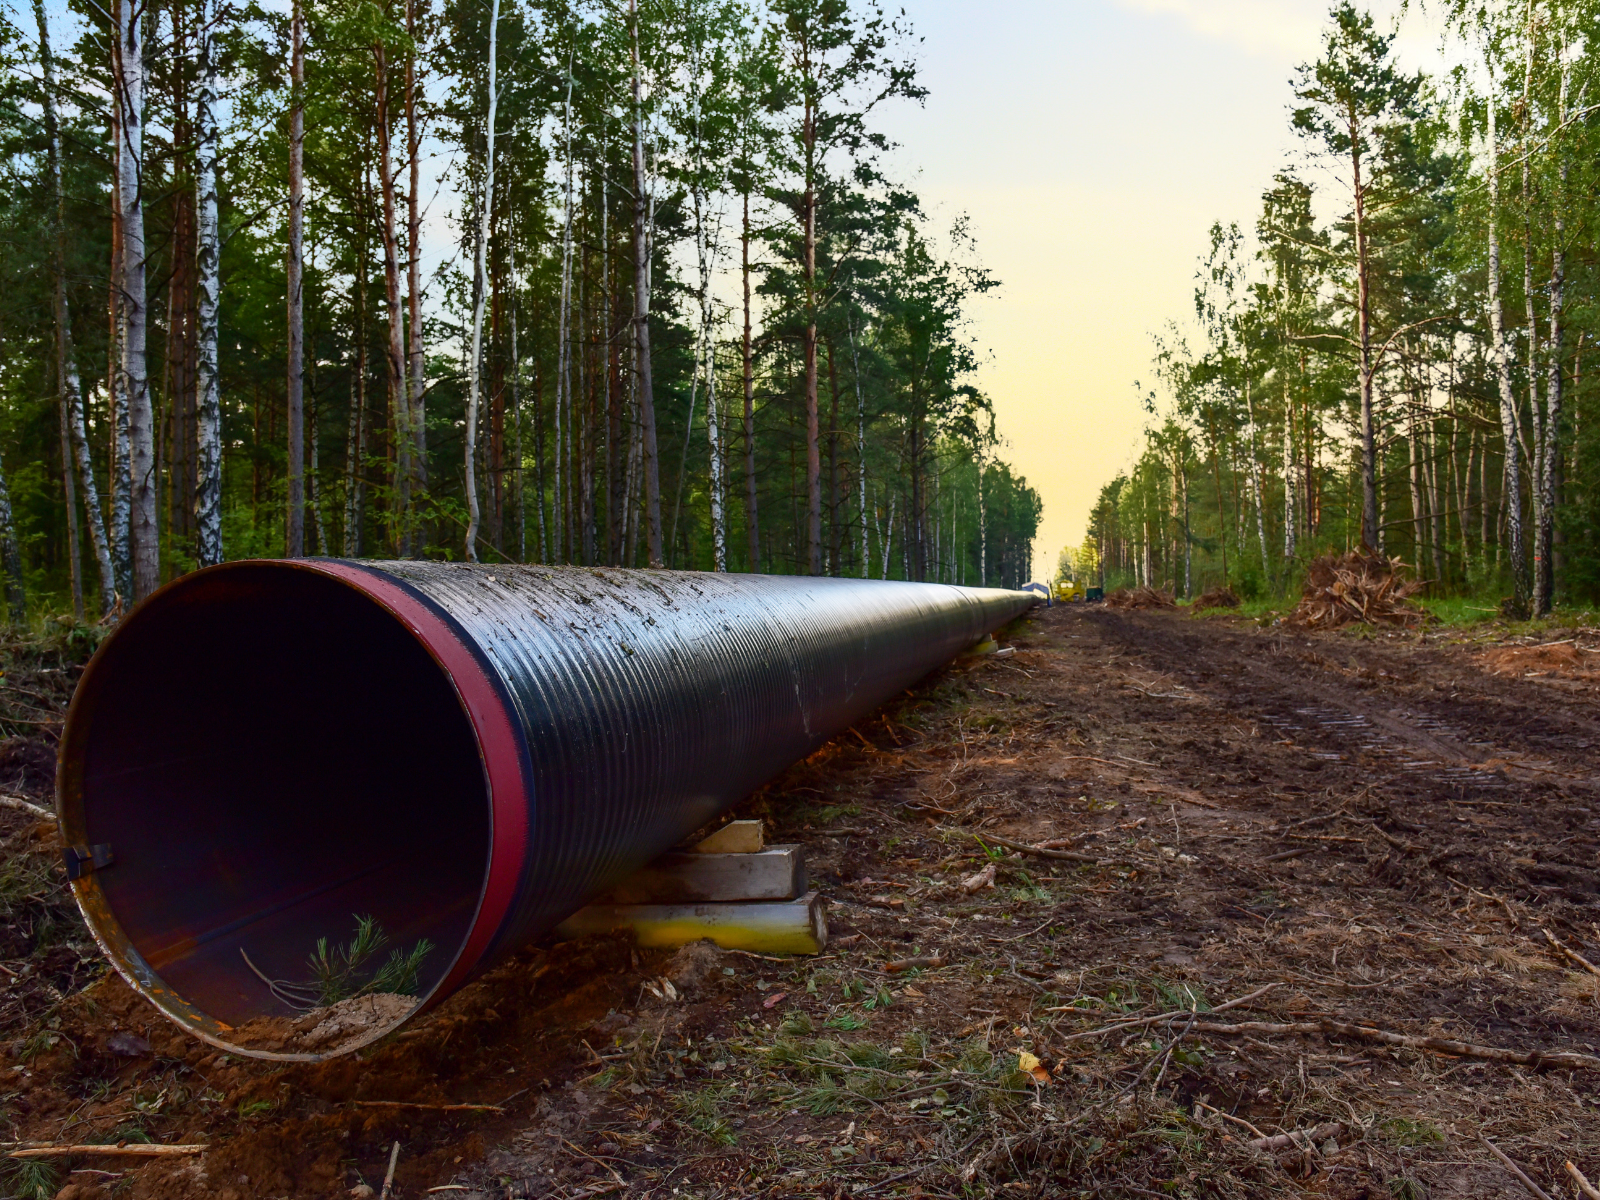 Image of a natural gas pipeline between trees.